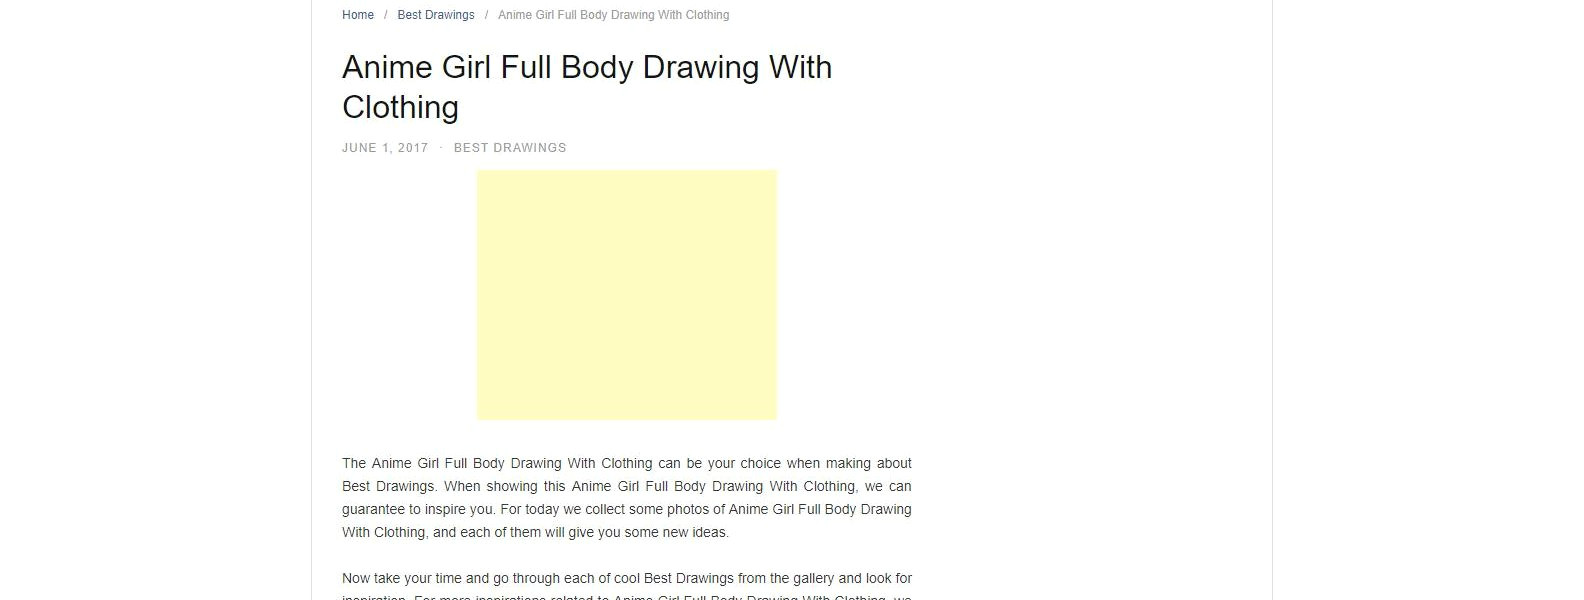 Anime Female Body Drawing Anime Girl Full Body Drawing with Clothing Great Drawing